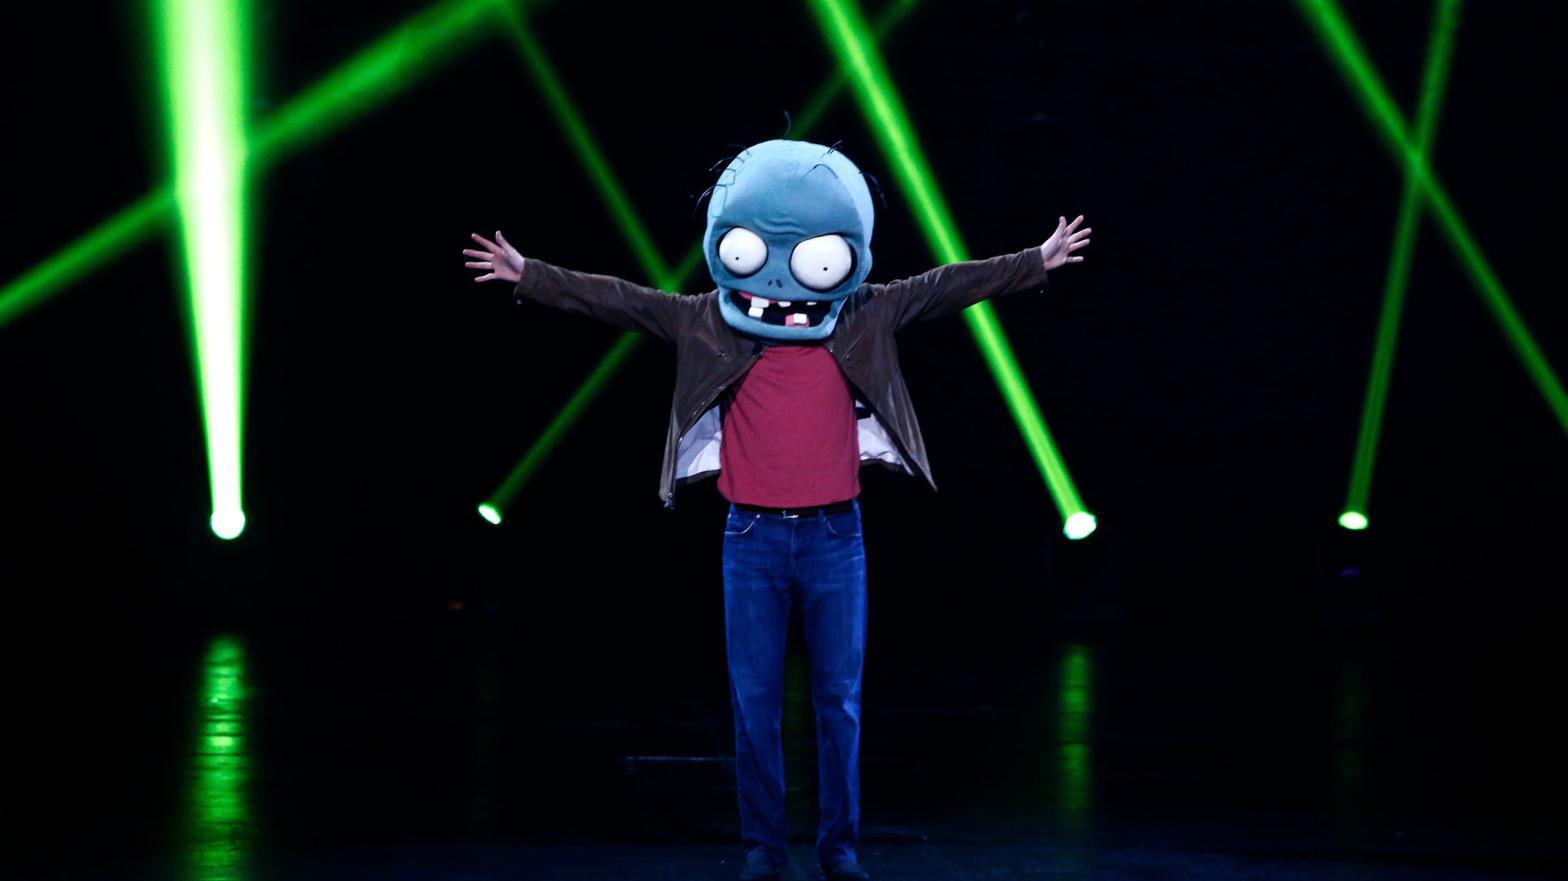 PopCap co-founder John Vechey wearing a zombie mask at E3 2013. (Photo: Eric Thayer, Getty Images)